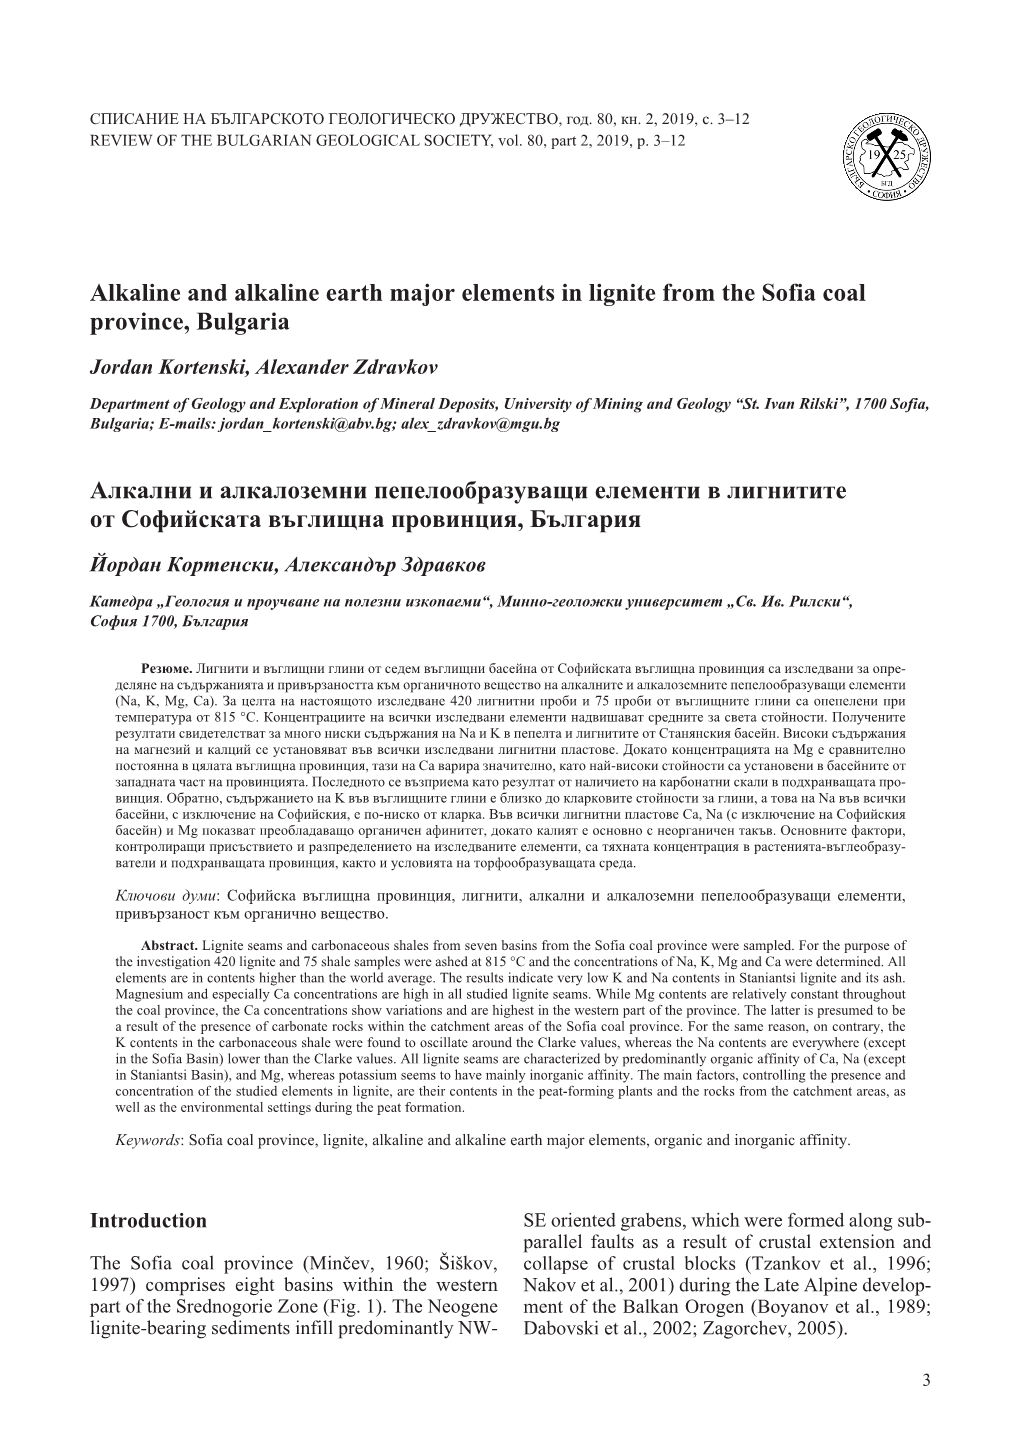 Alkaline and Alkaline Earth Major Elements in Lignite from the Sofia Coal Province, Bulgaria